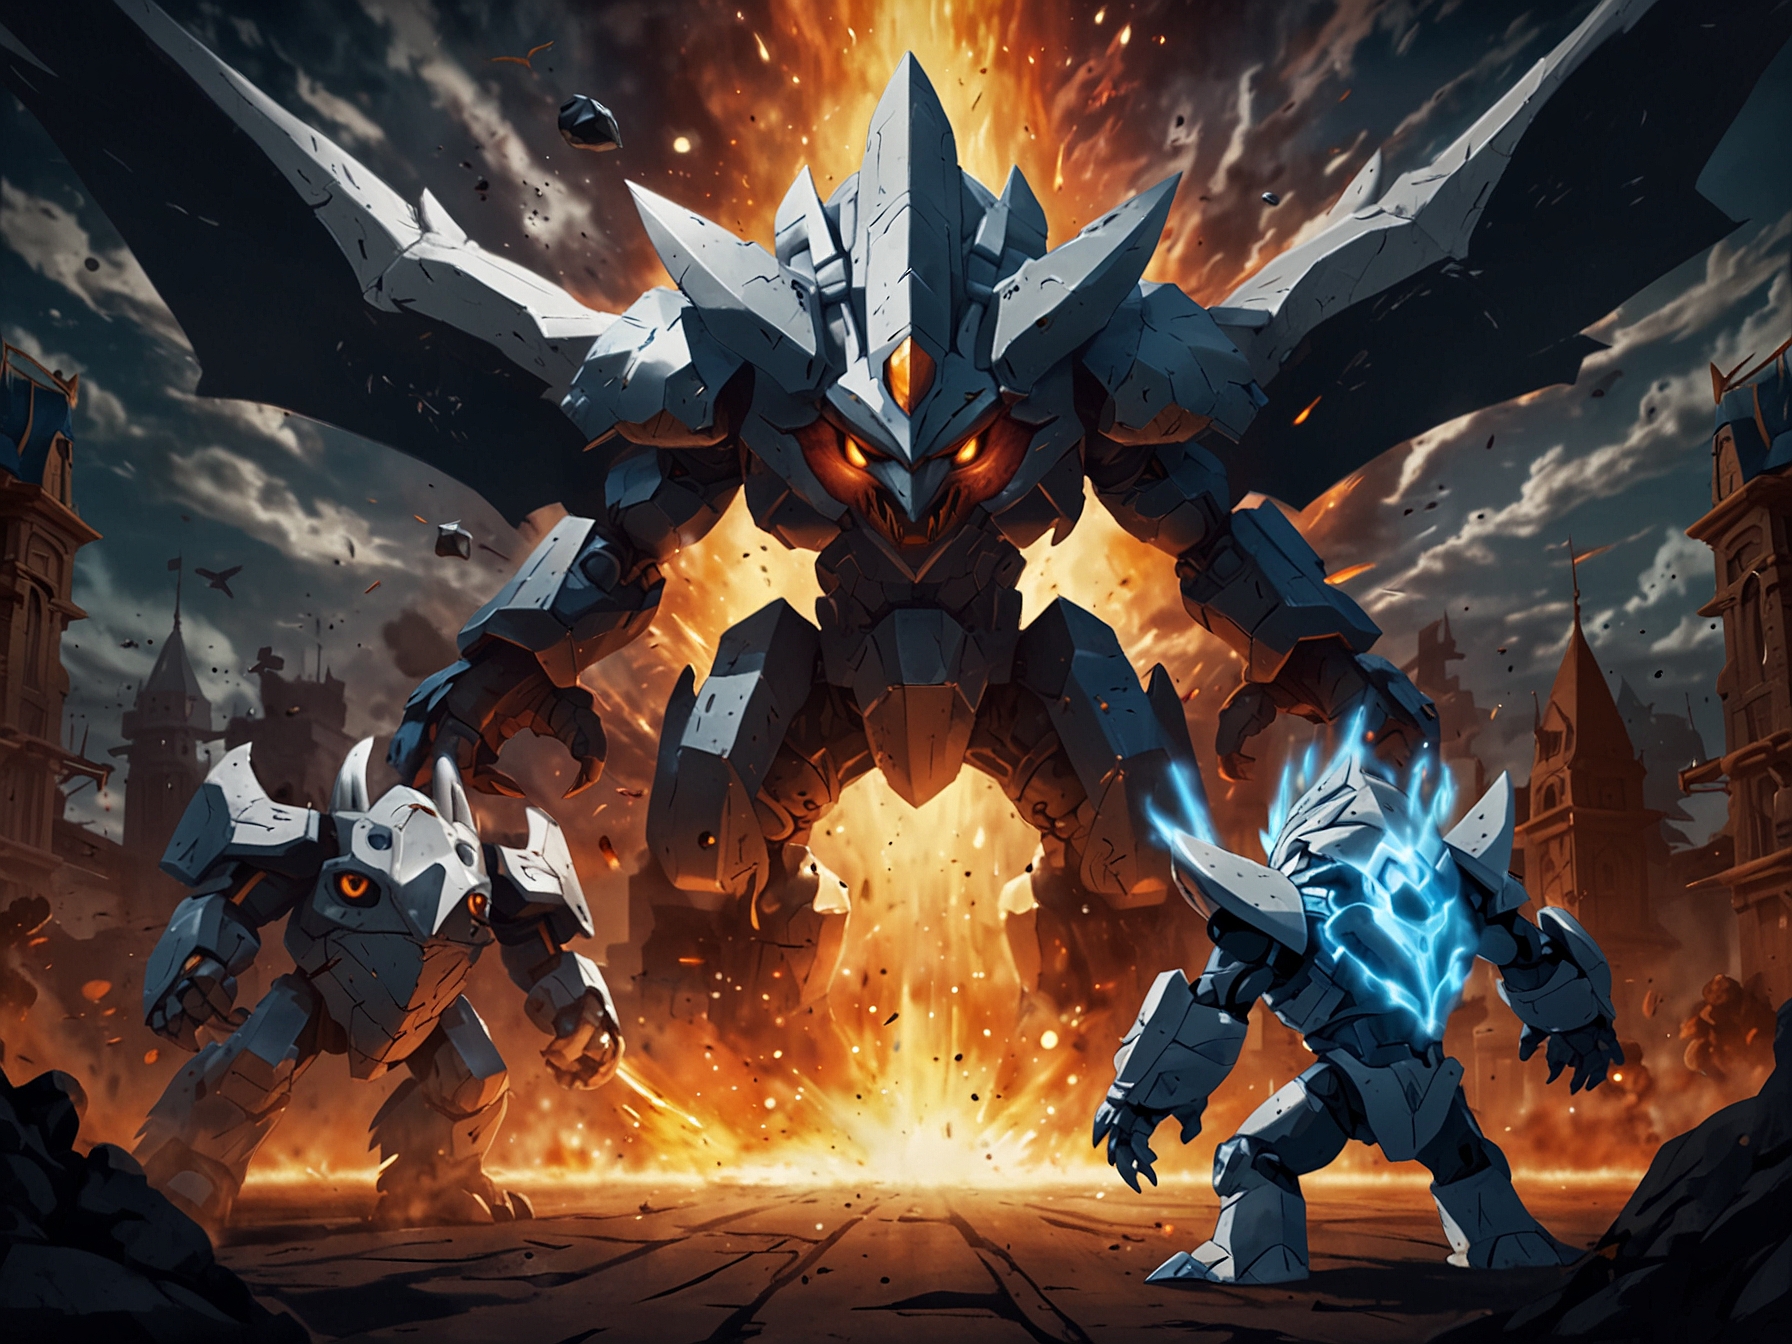 A detailed graphic featuring Shadow Regice in the final battle phase, with recommended counters such as Reshiram, Metagross, and Terrakion launching powerful Fire and Steel-type attacks.